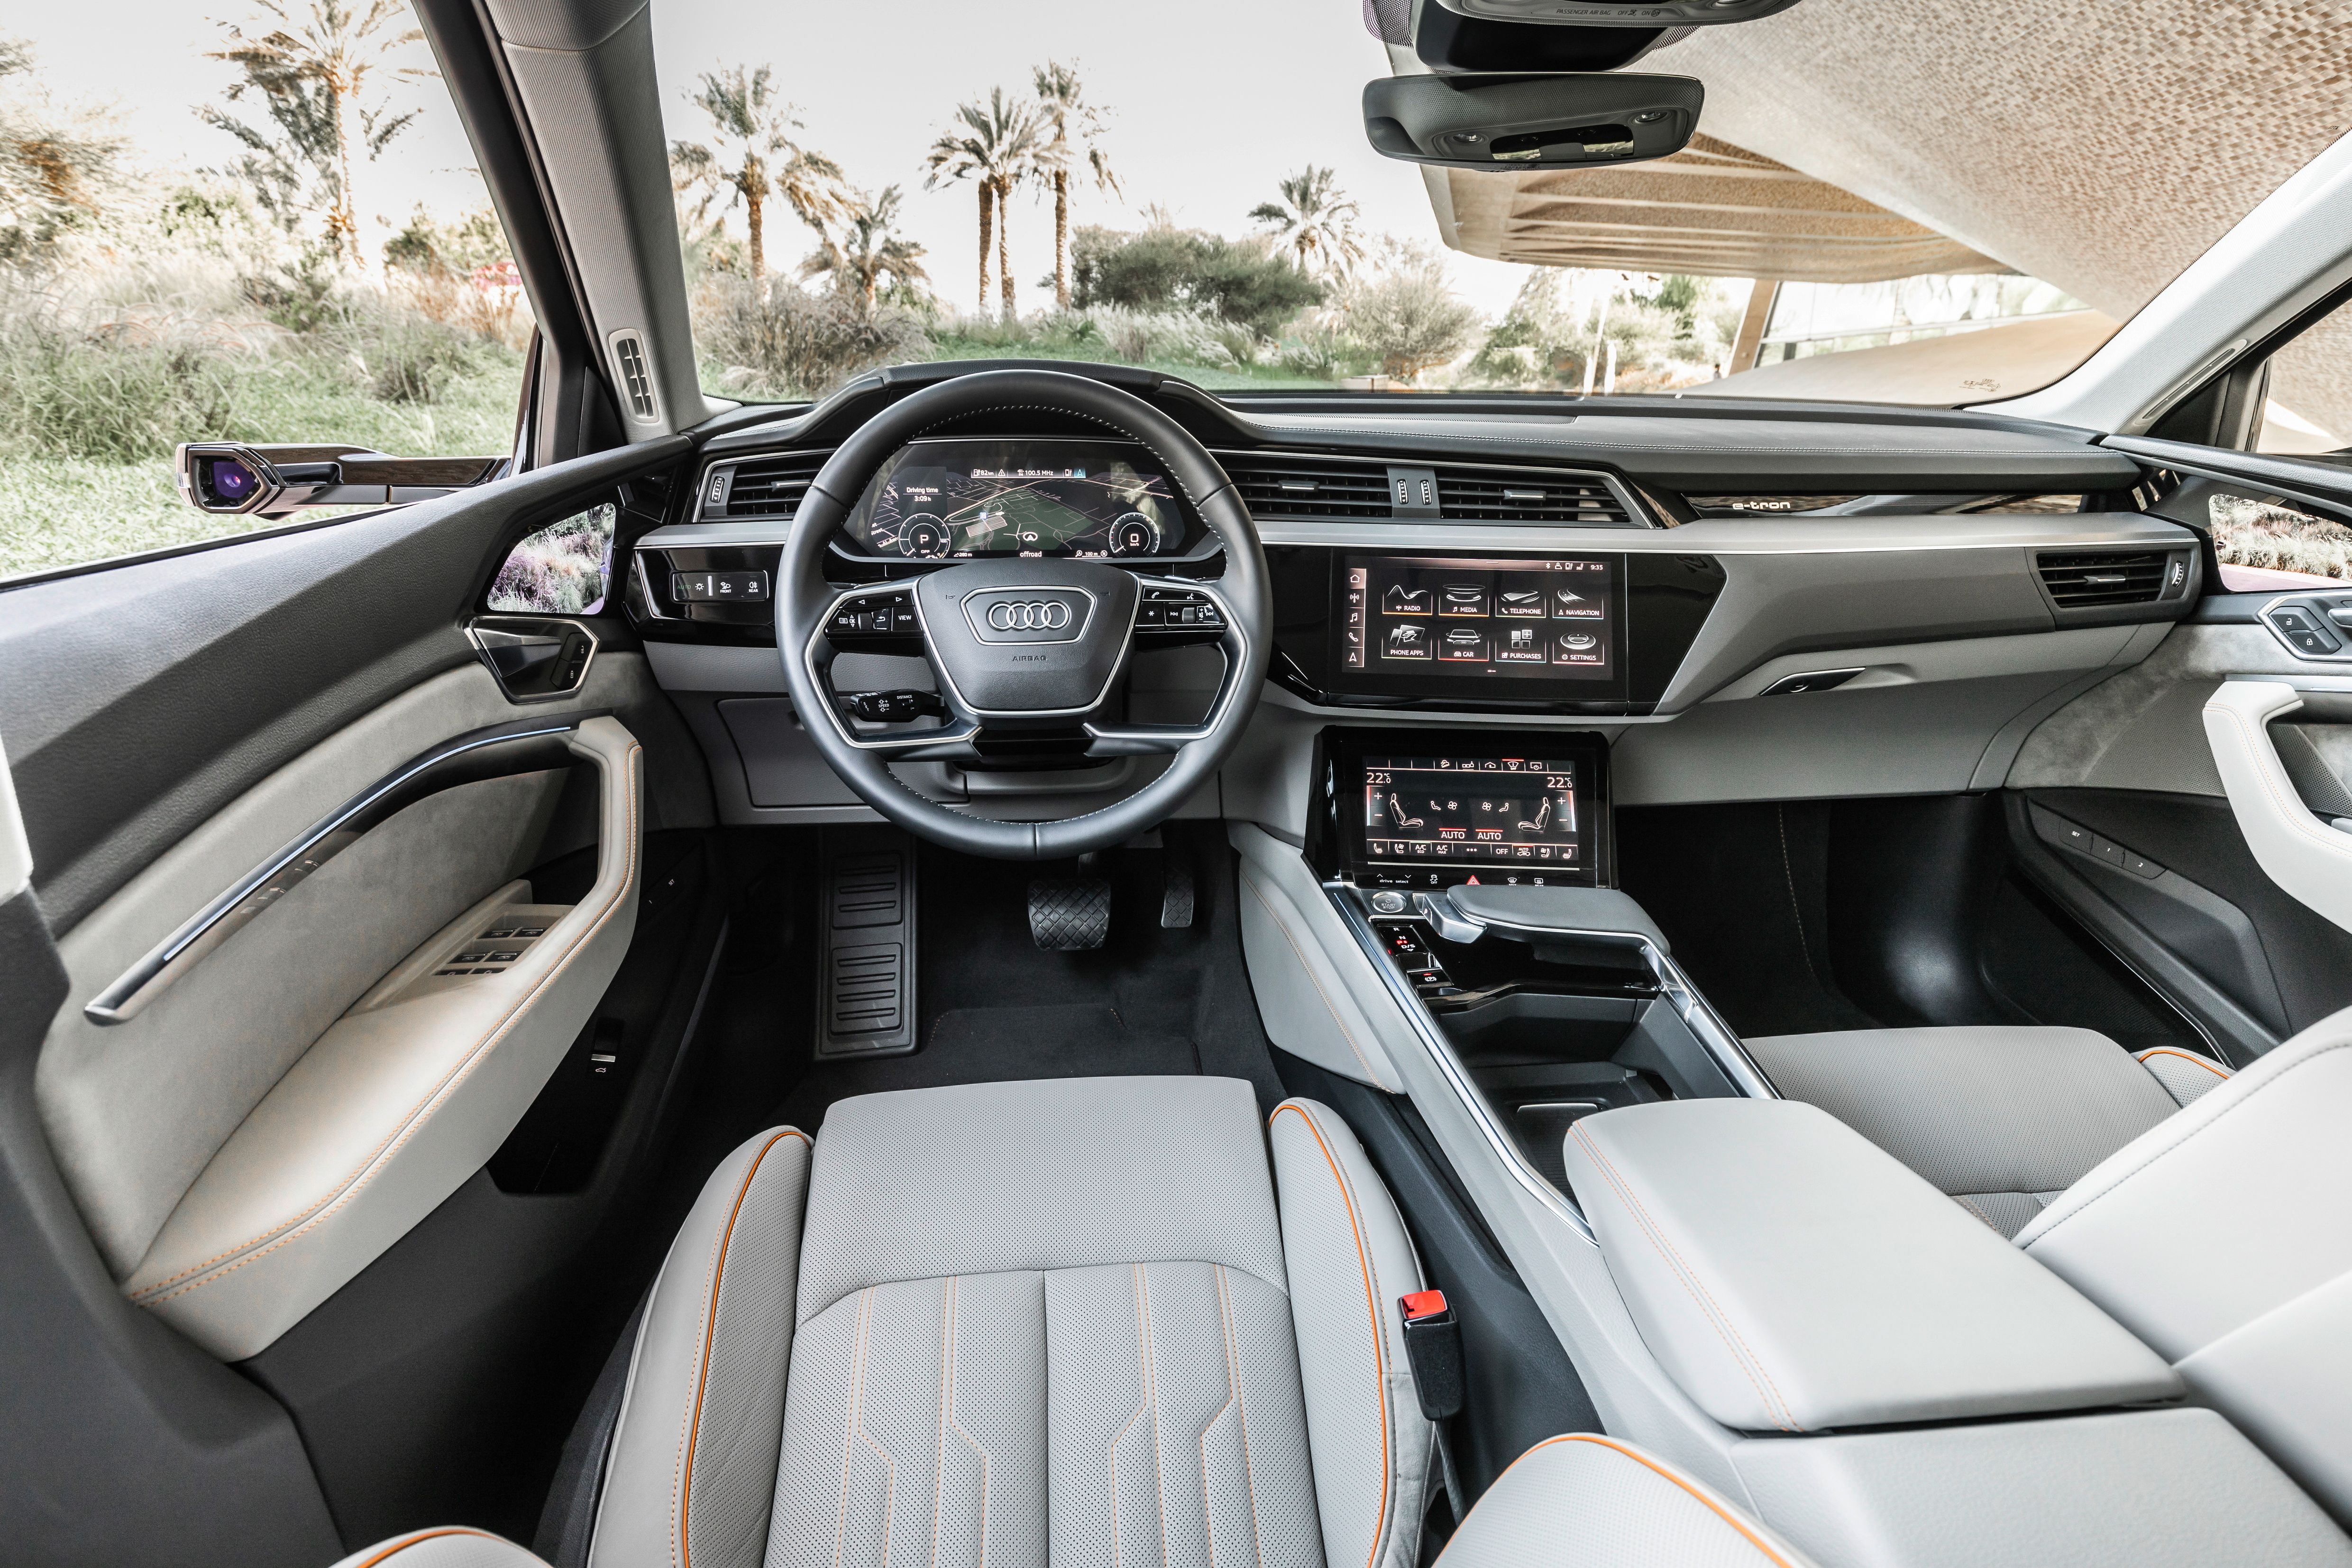 The interior of the e-tron from behind the wheel